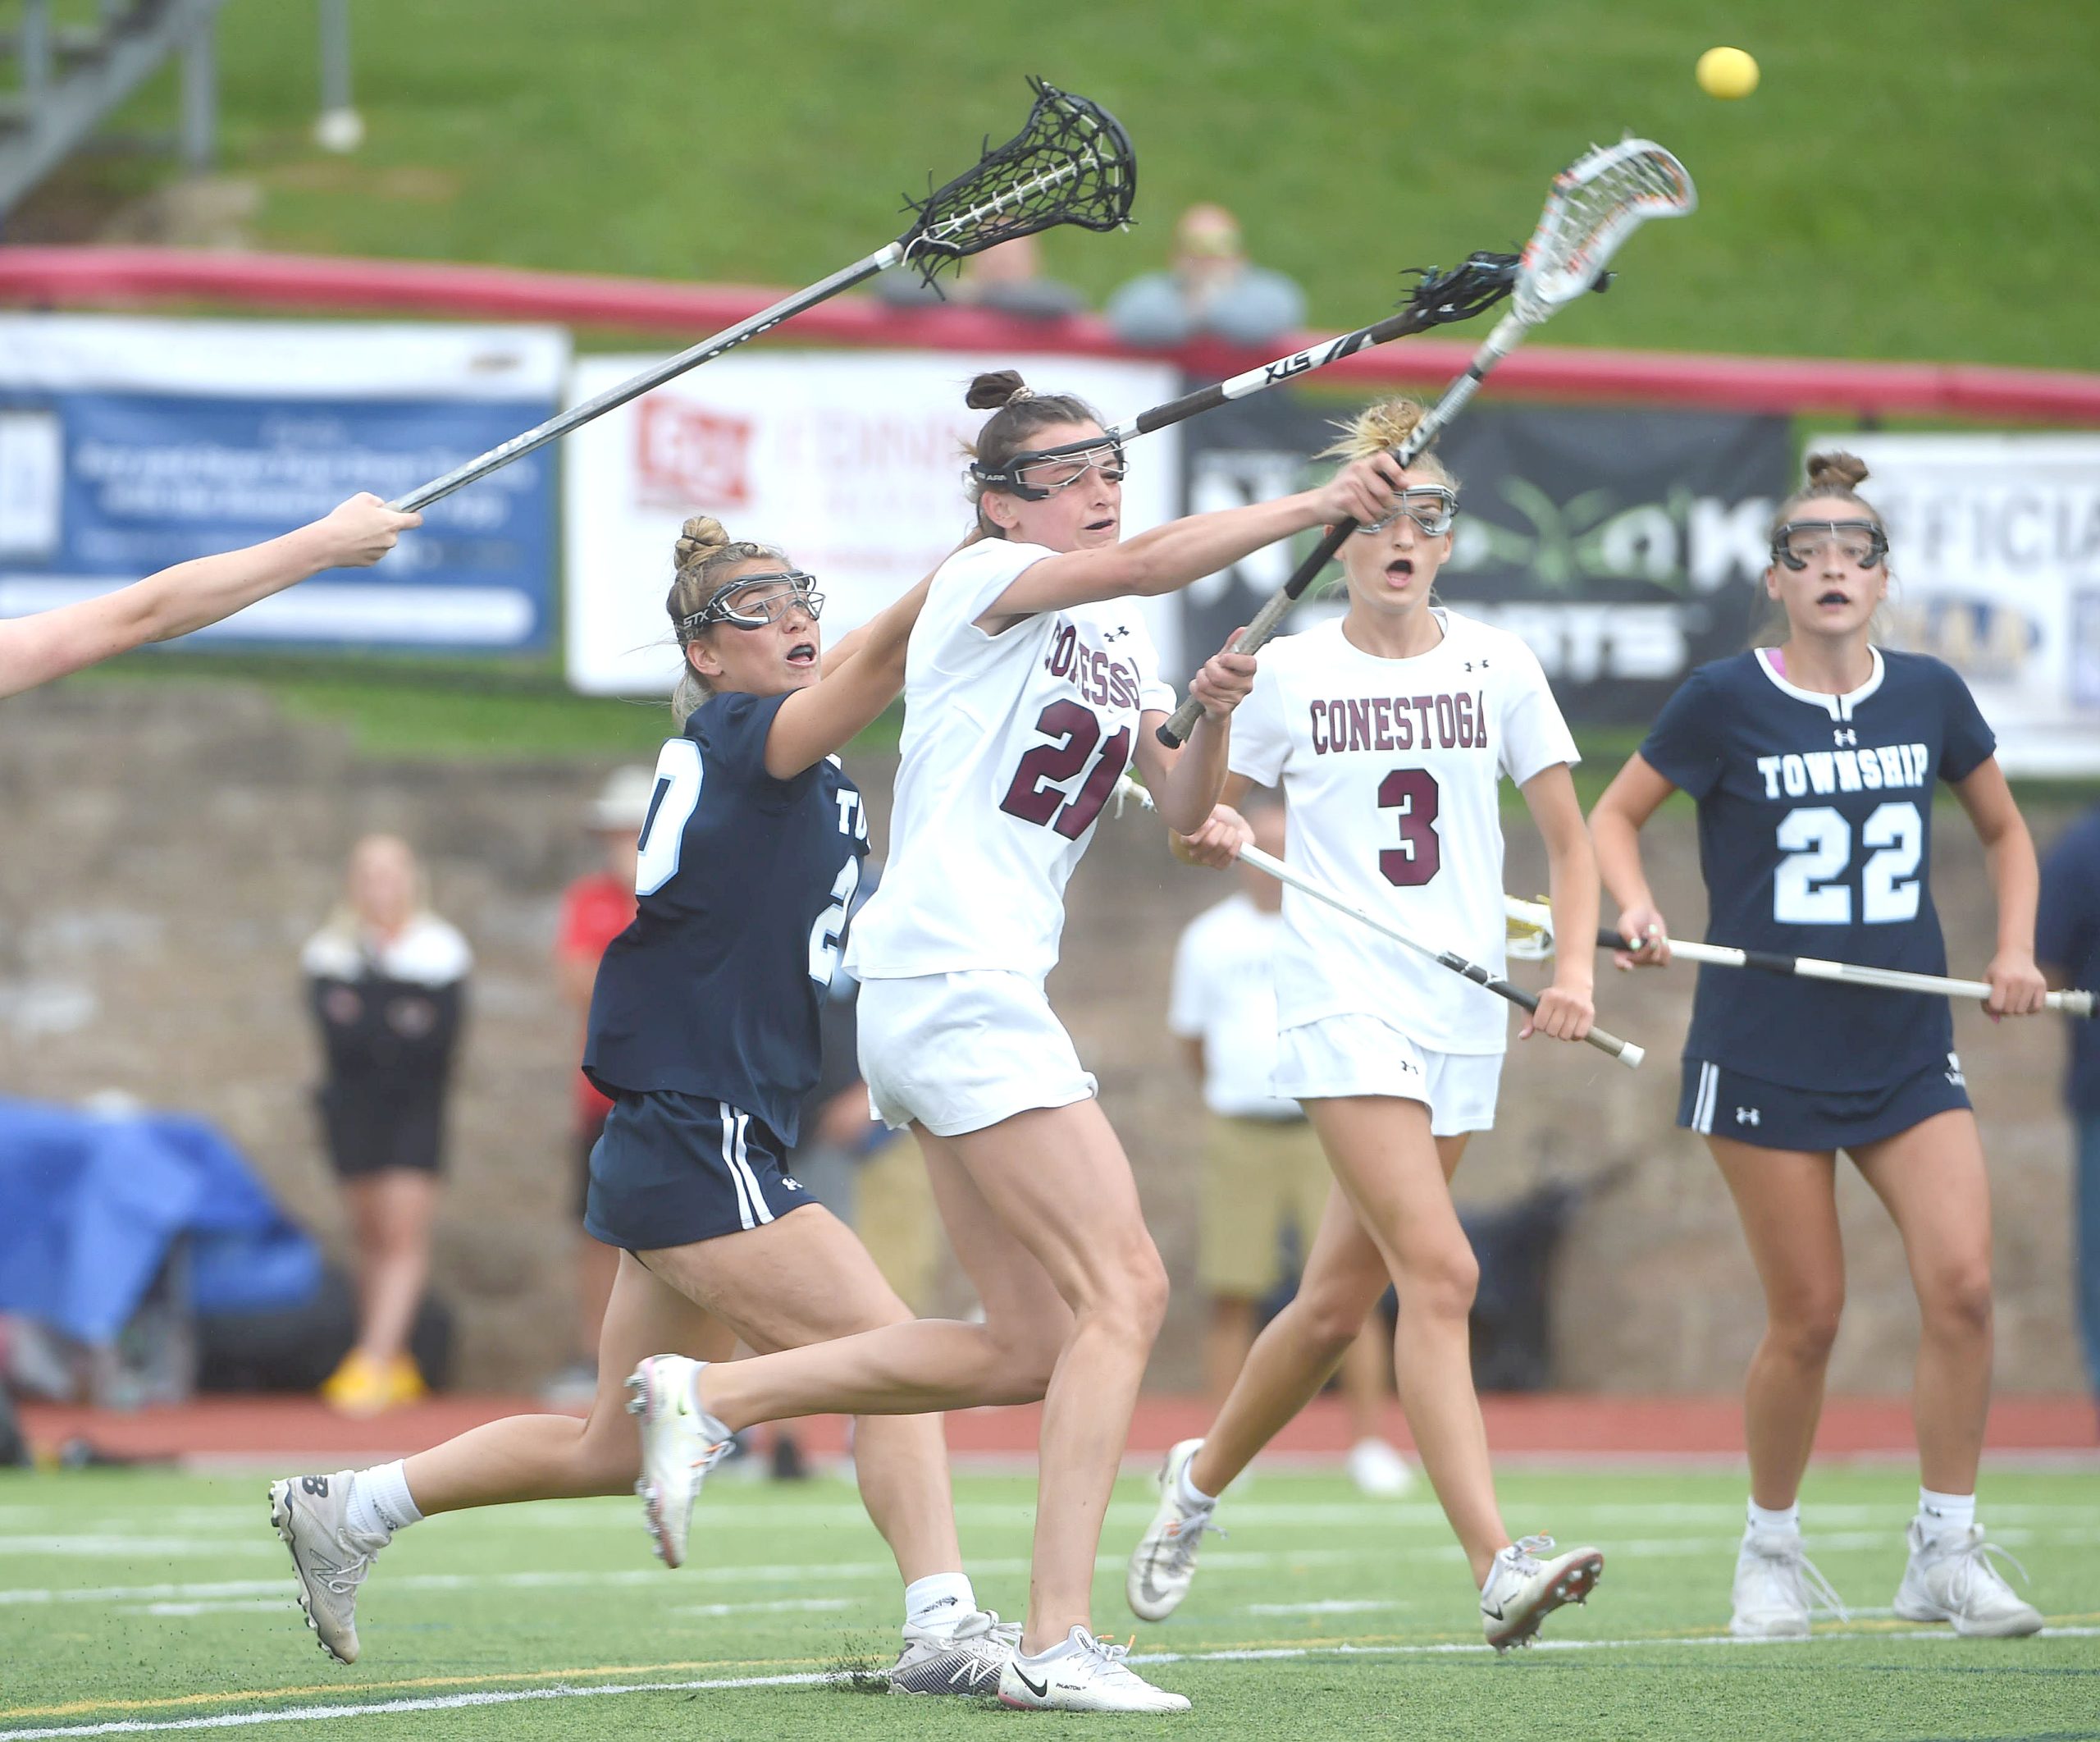 Chester County girls lacrosse teams look to continue statewide success